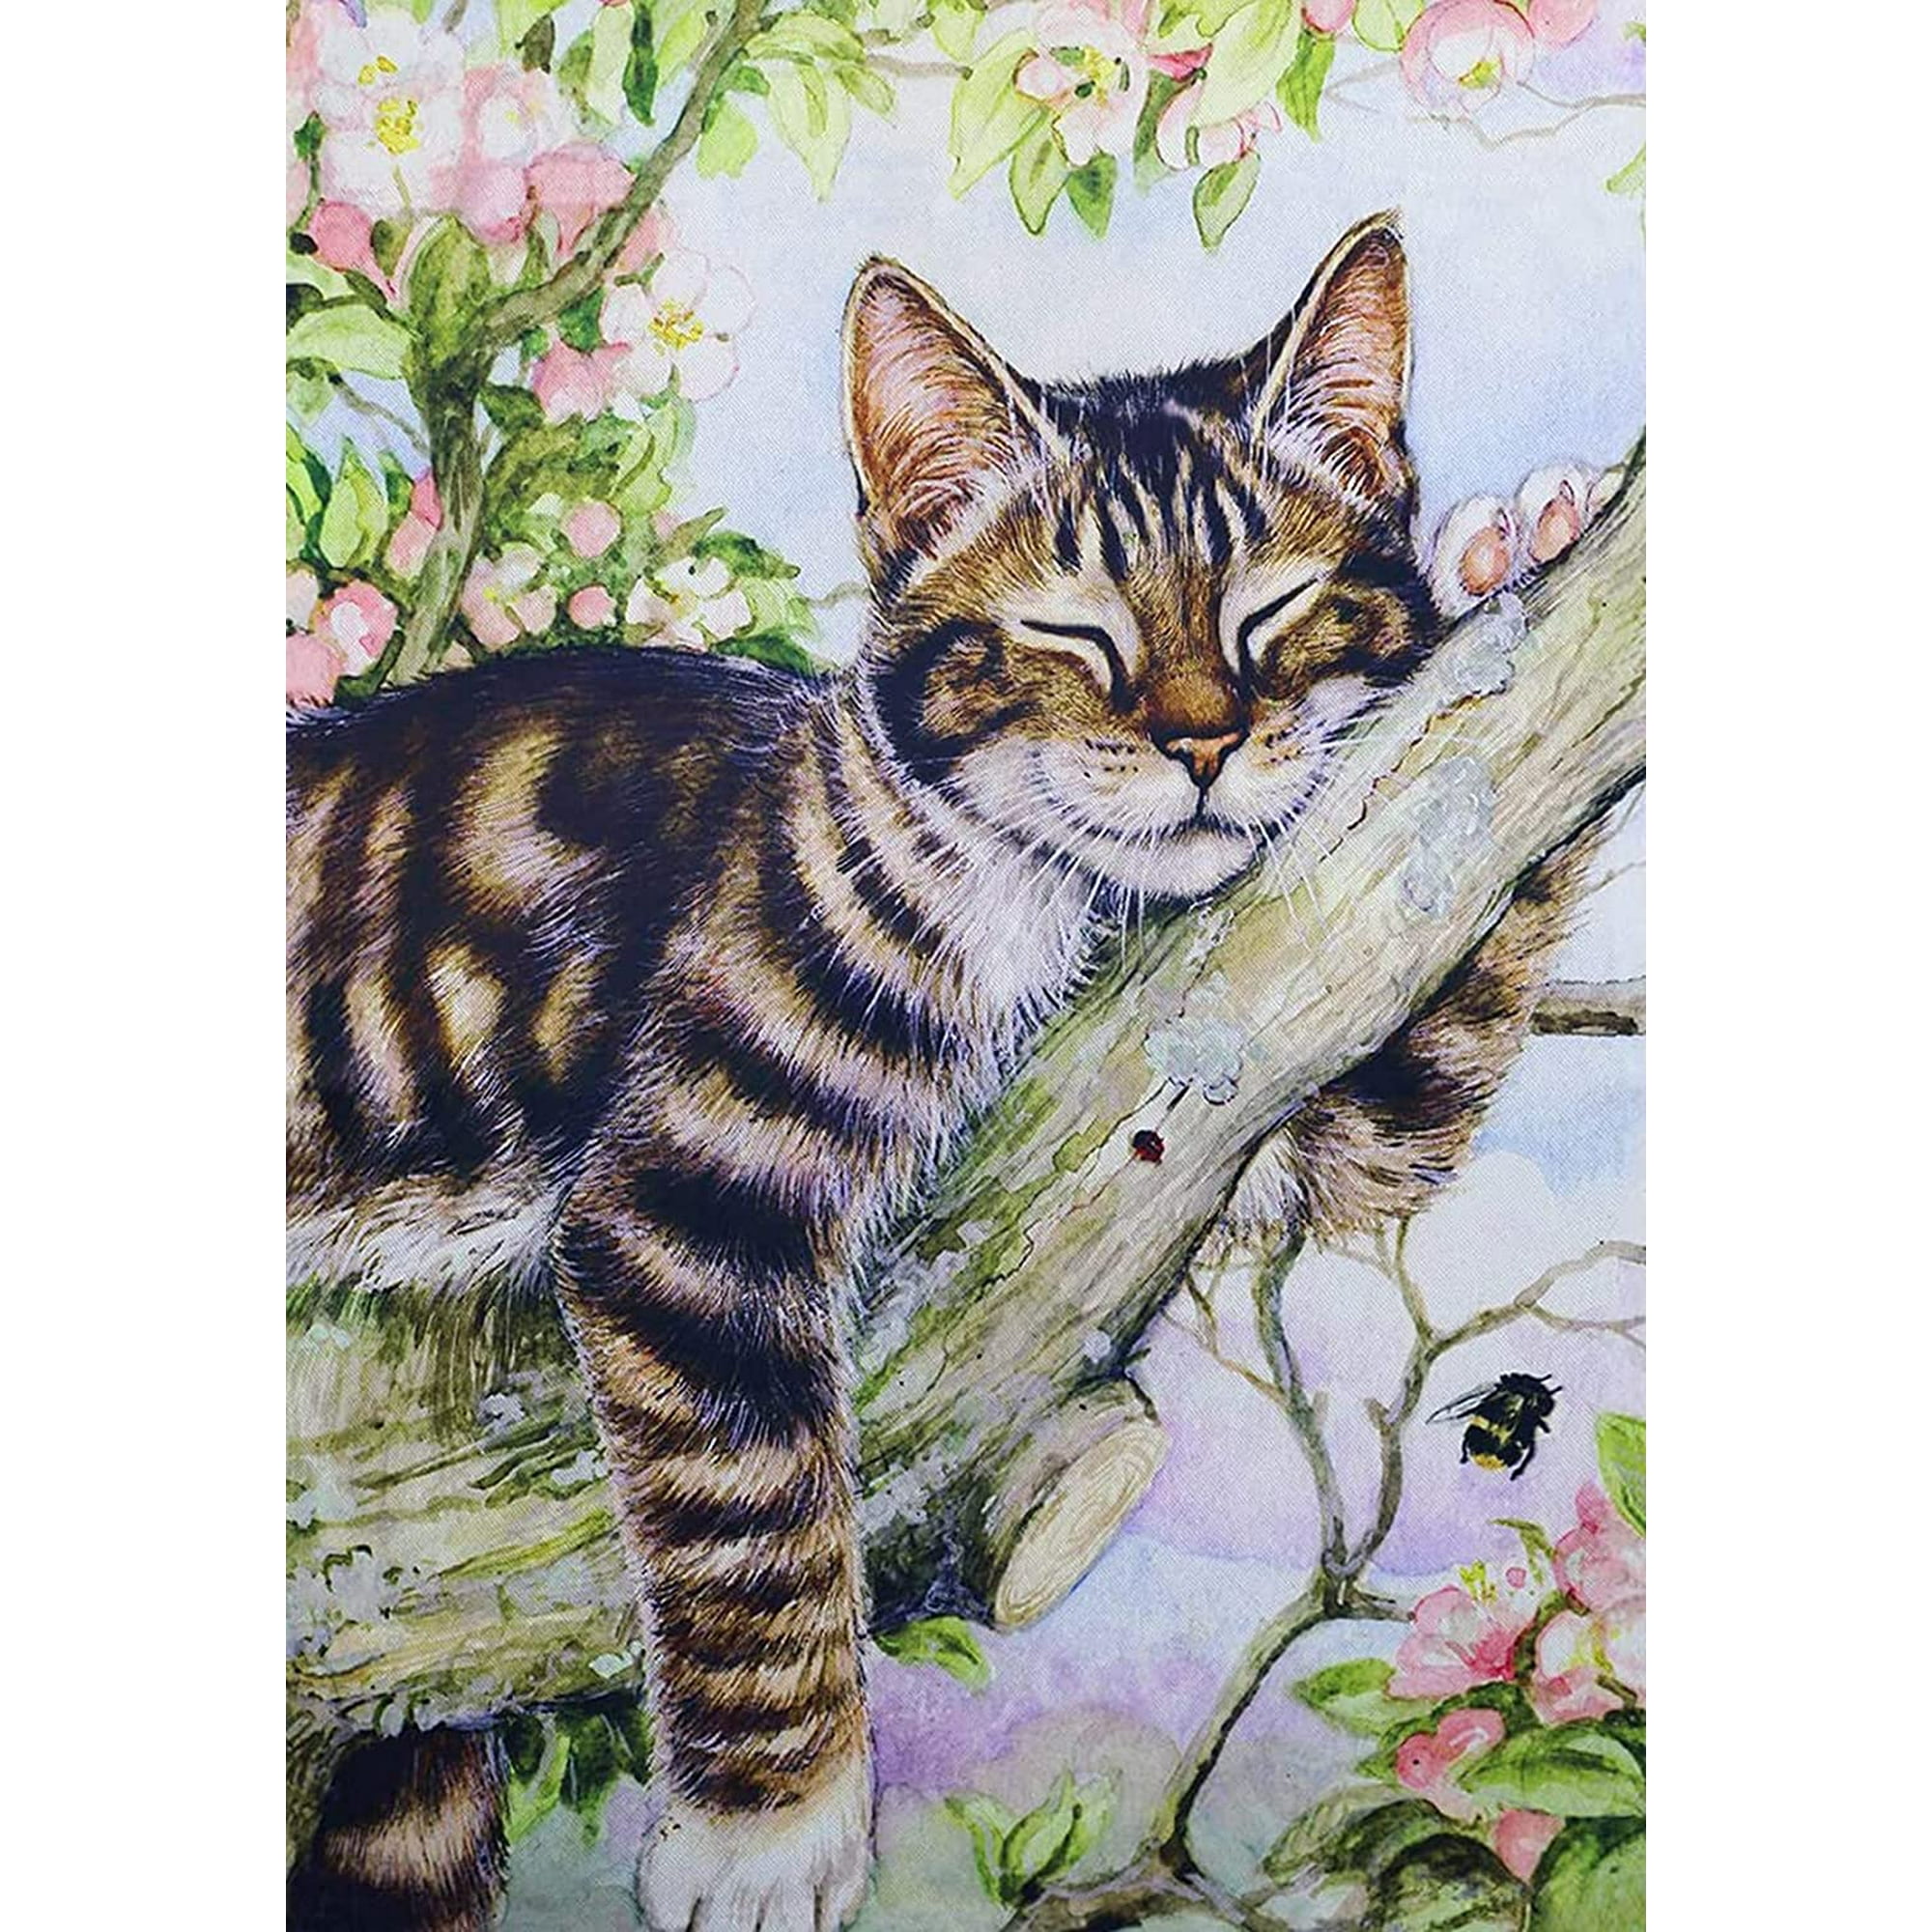 DIY Diamond Painting Kits for Adults, Round Full Drill Striped Cat Diamond  Painting Animals Diamond Art Kits Gem Painting Crafts for Home Wall Decor  12x16 Inch (Cat) | Walmart Canada